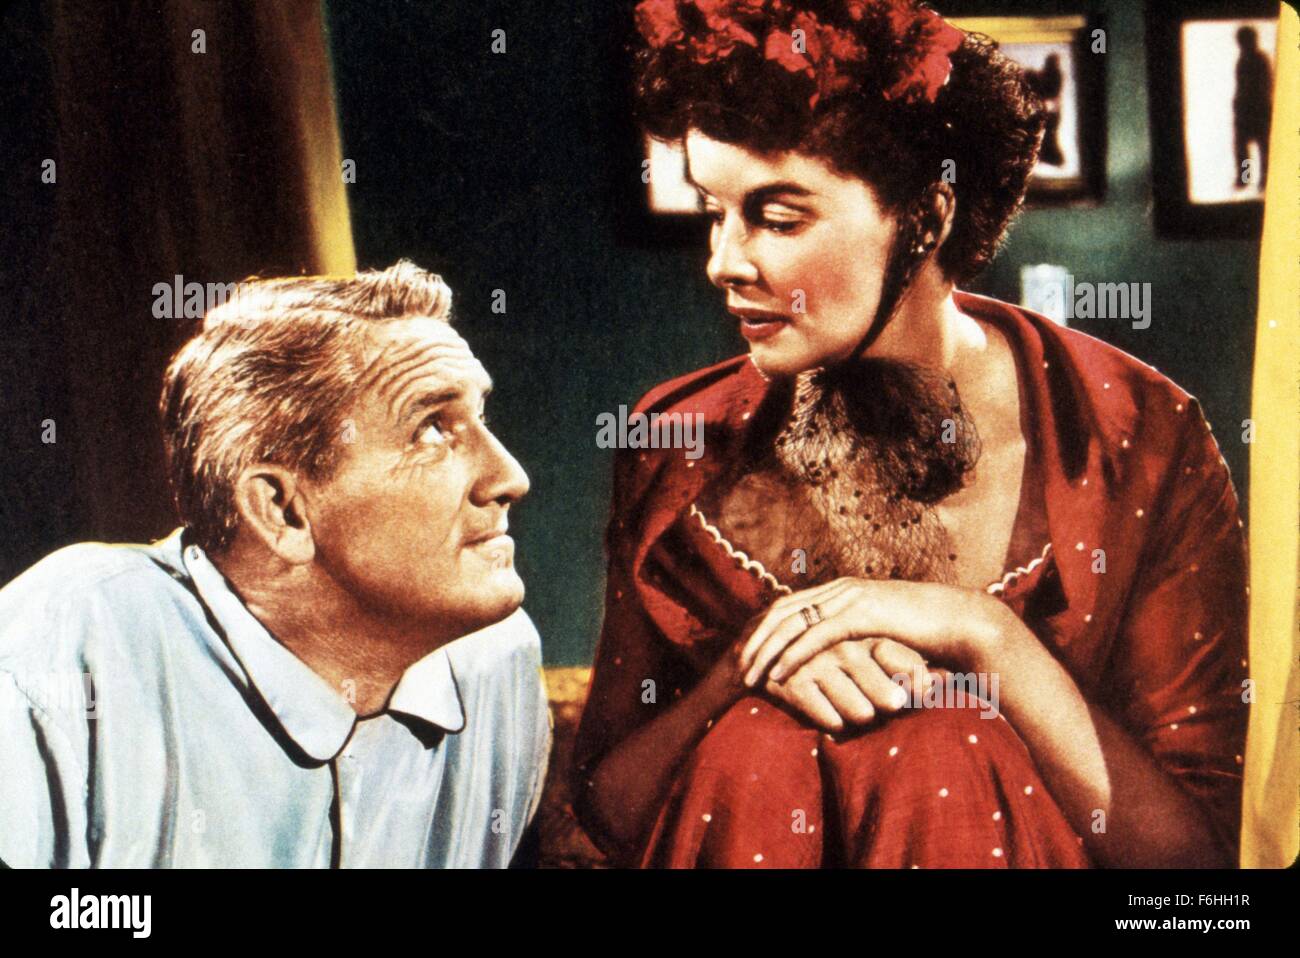 1949, Film Title: ADAM'S RIB, Director: GEORGE CUKOR, Studio: MGM, Pictured: GAZE, KATHARINE HEPBURN, SPENCER TRACY, SITTING, CASUAL, HAT, HANDS IN LAP. (Credit Image: SNAP) Stock Photo